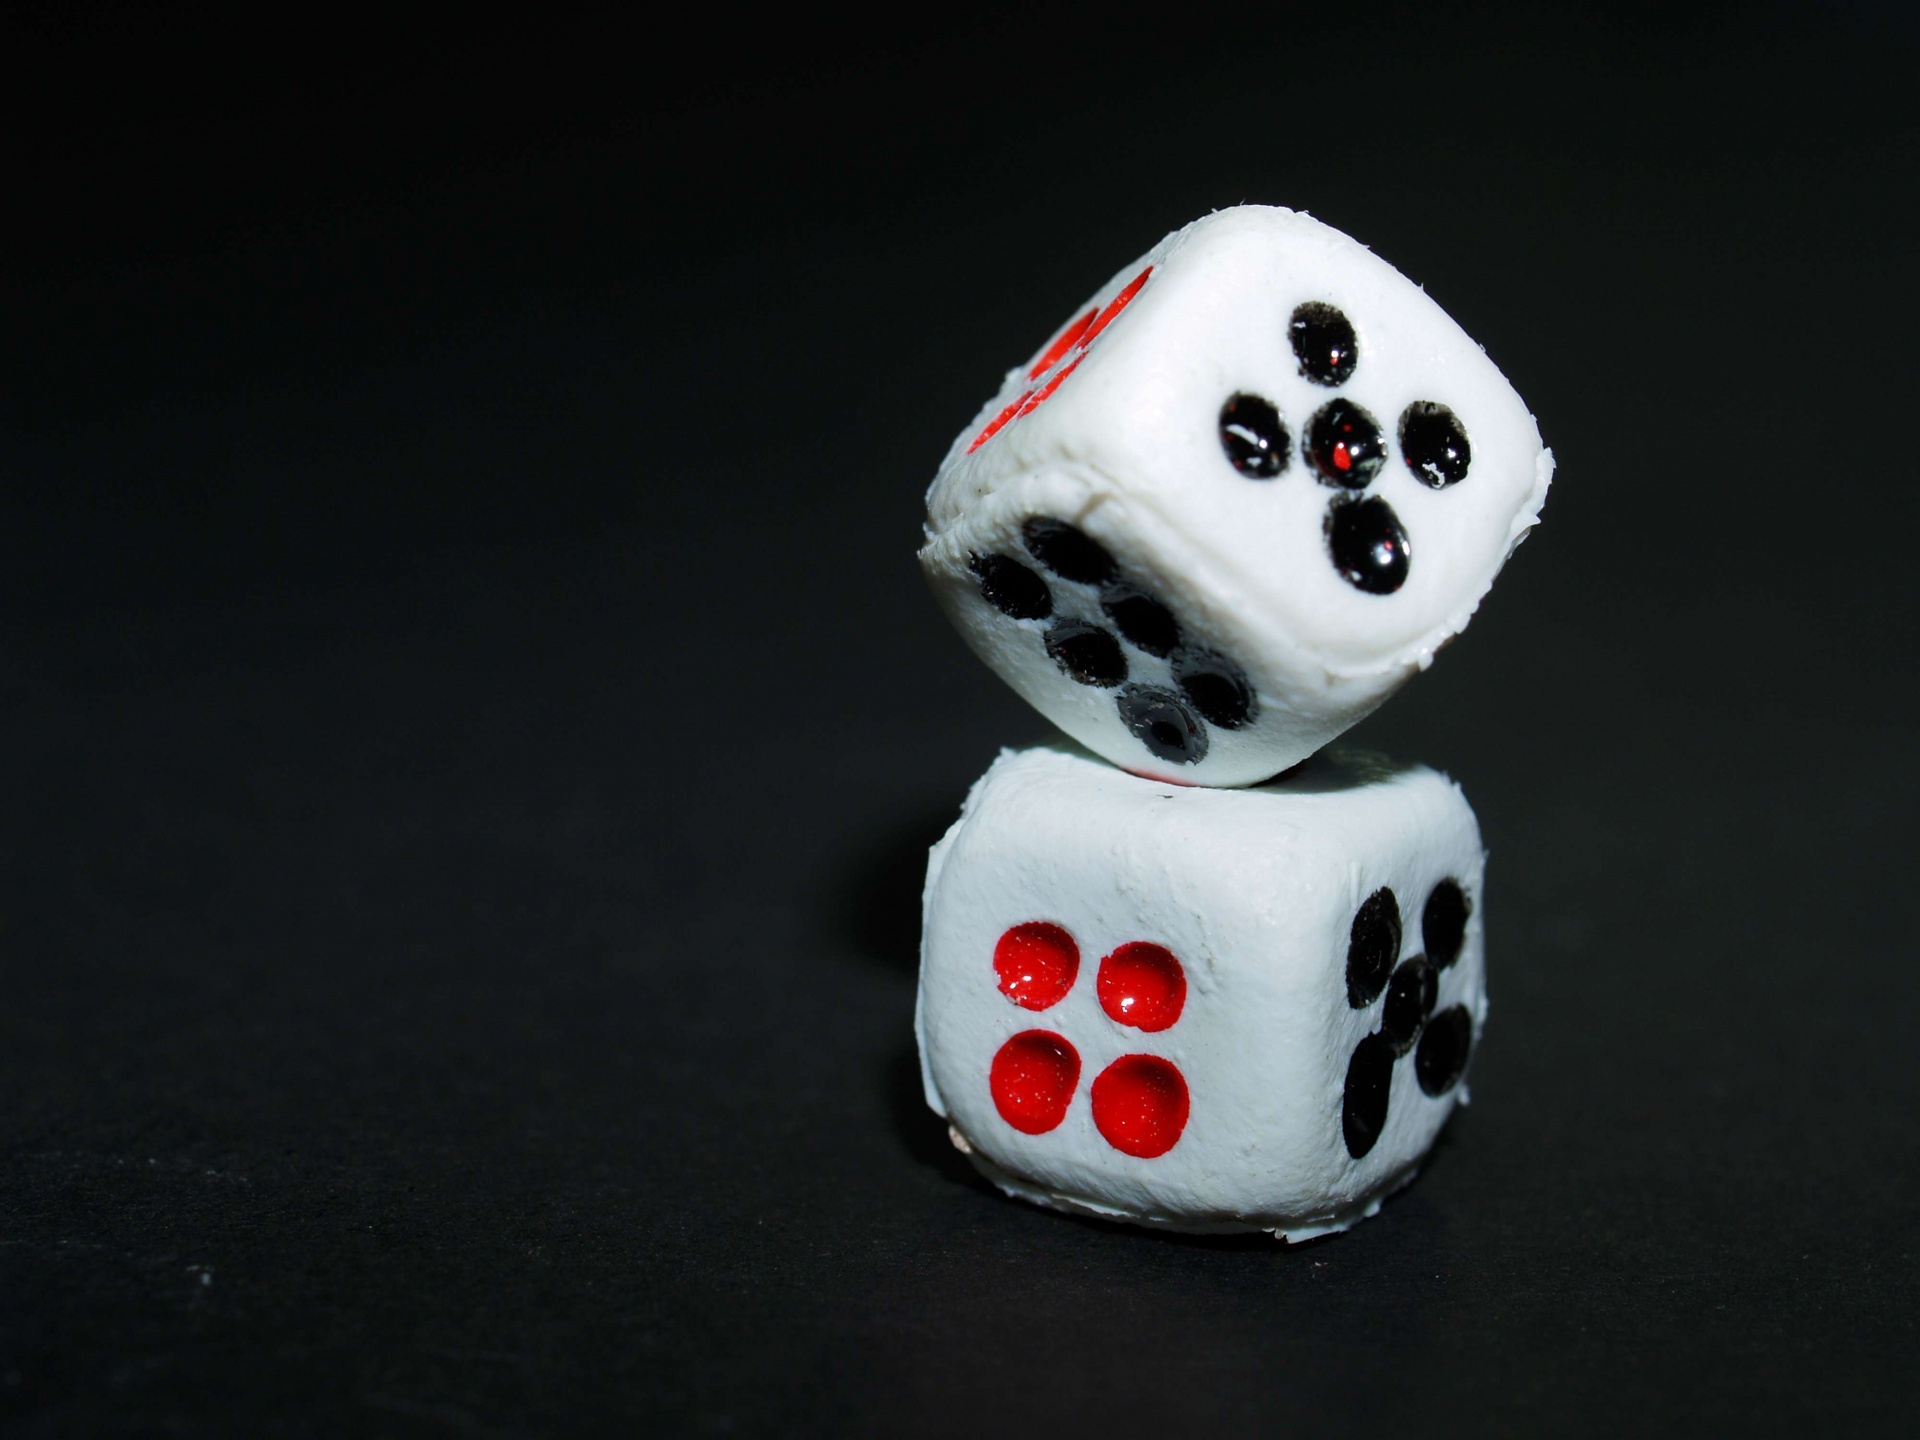 Dices 2 Free Photo Download | FreeImages